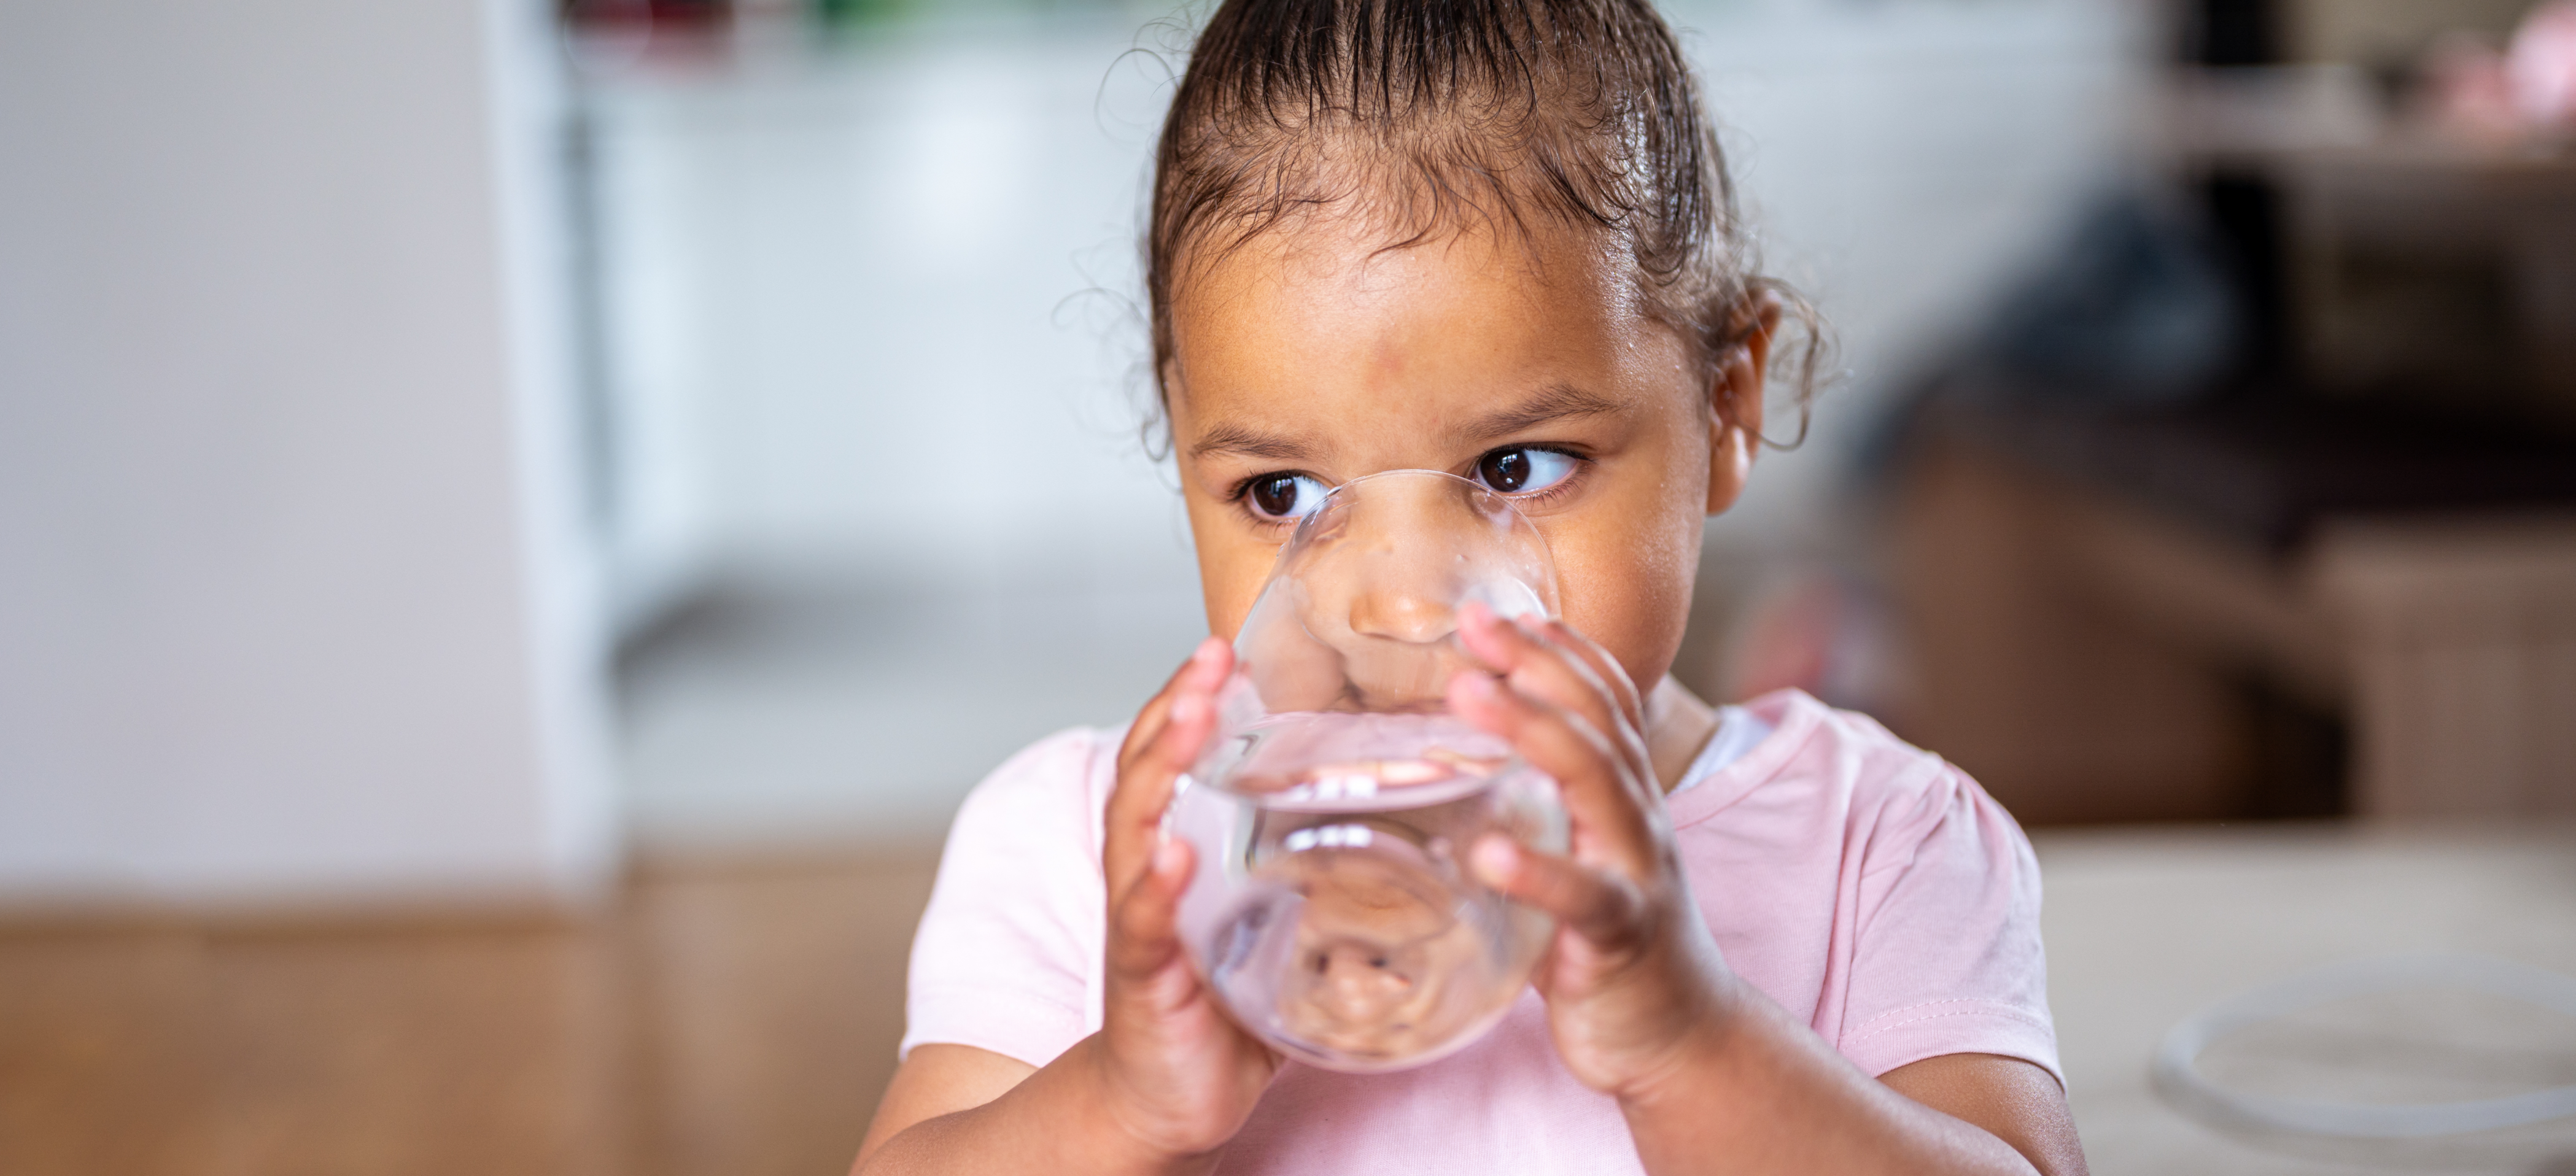 A small child with a pink shirt drinking water out of a glass.